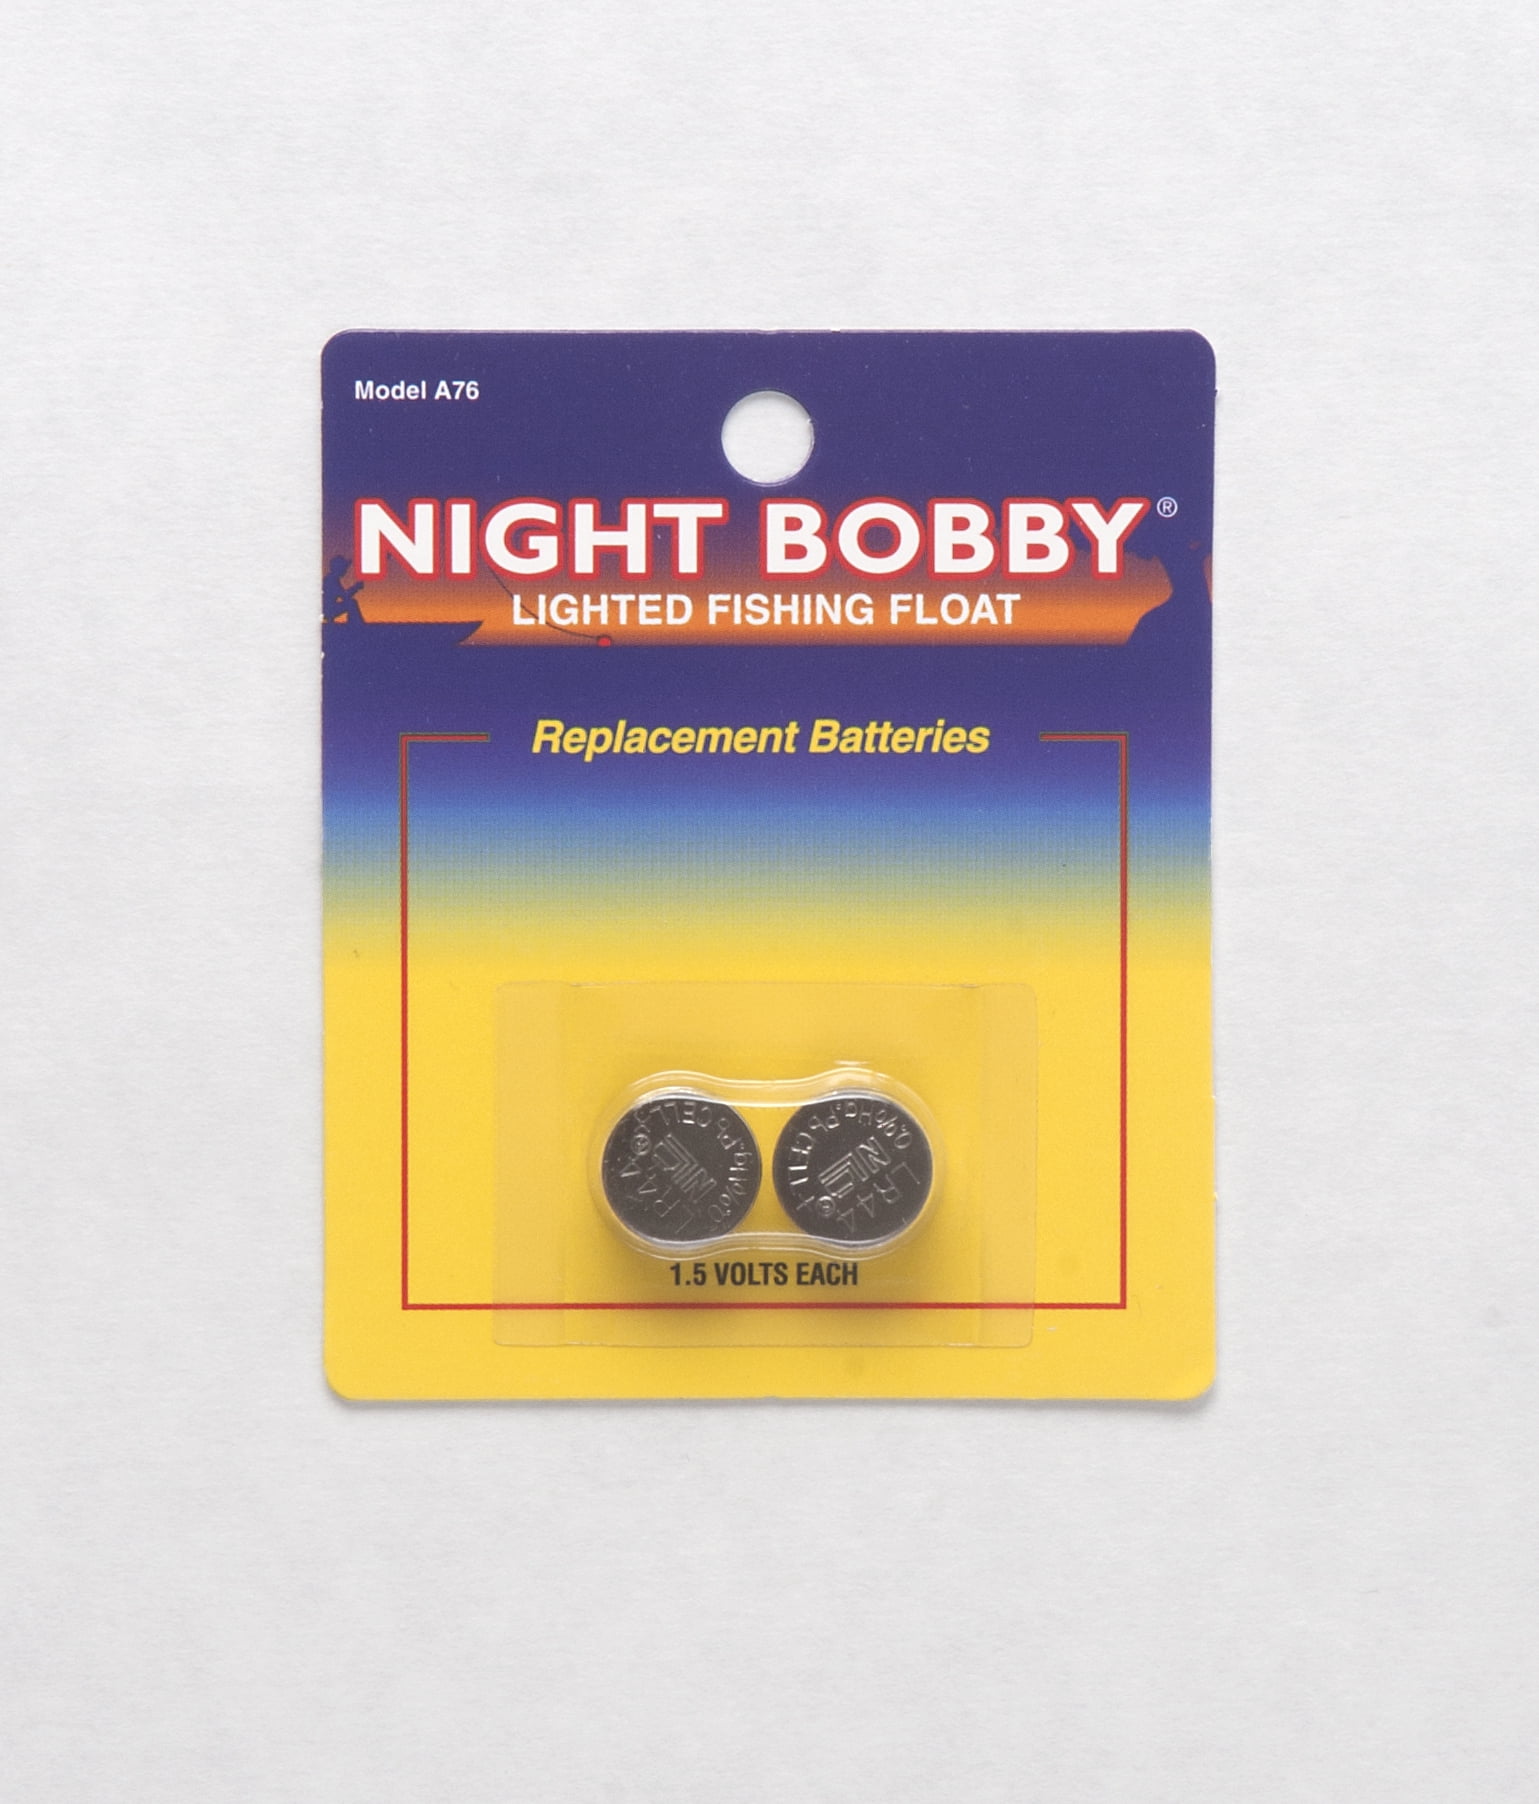 Night Bobby — Is A Fishing Gadget A Good Gift? 🐟 